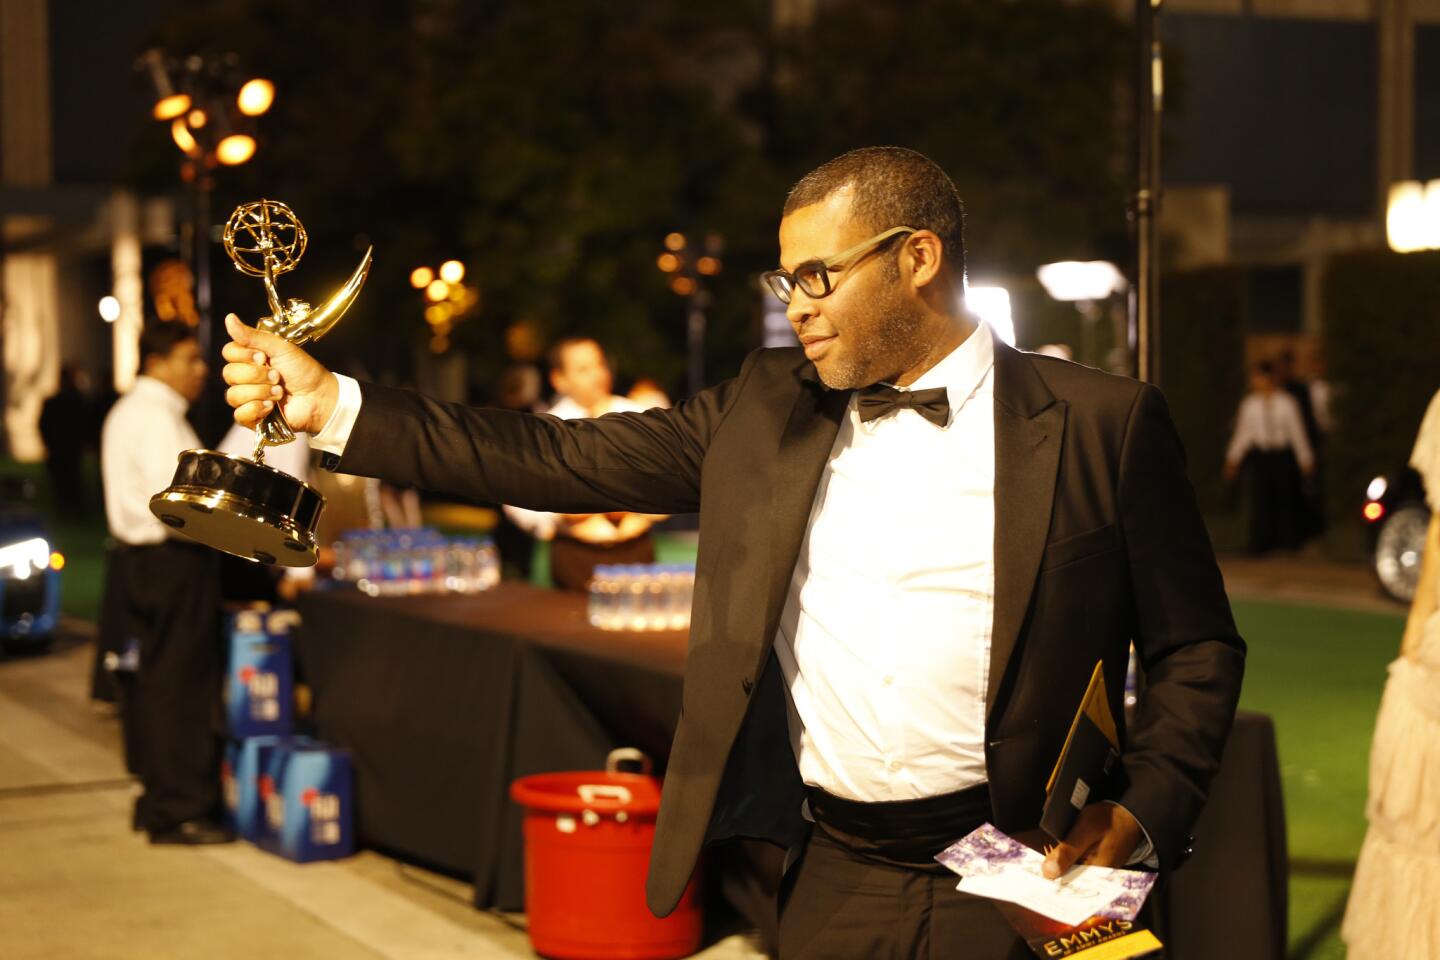 Emmys 2016: Governors Ball